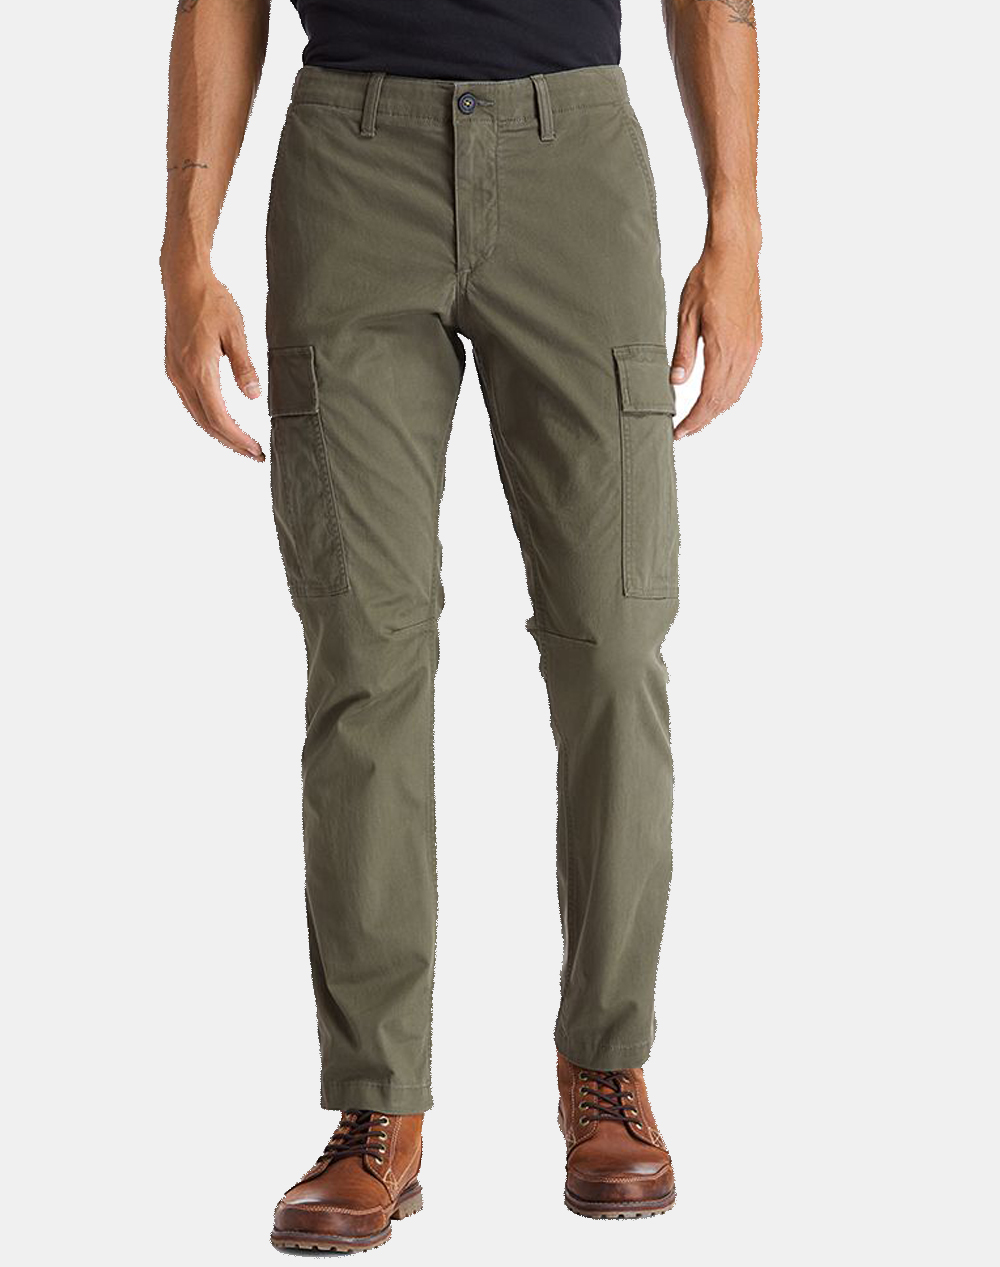 TIMBERLAND Outdoor Cargo Pant TB0A2CZH-A58 Olive 3720ATIMB2030002_XR25144